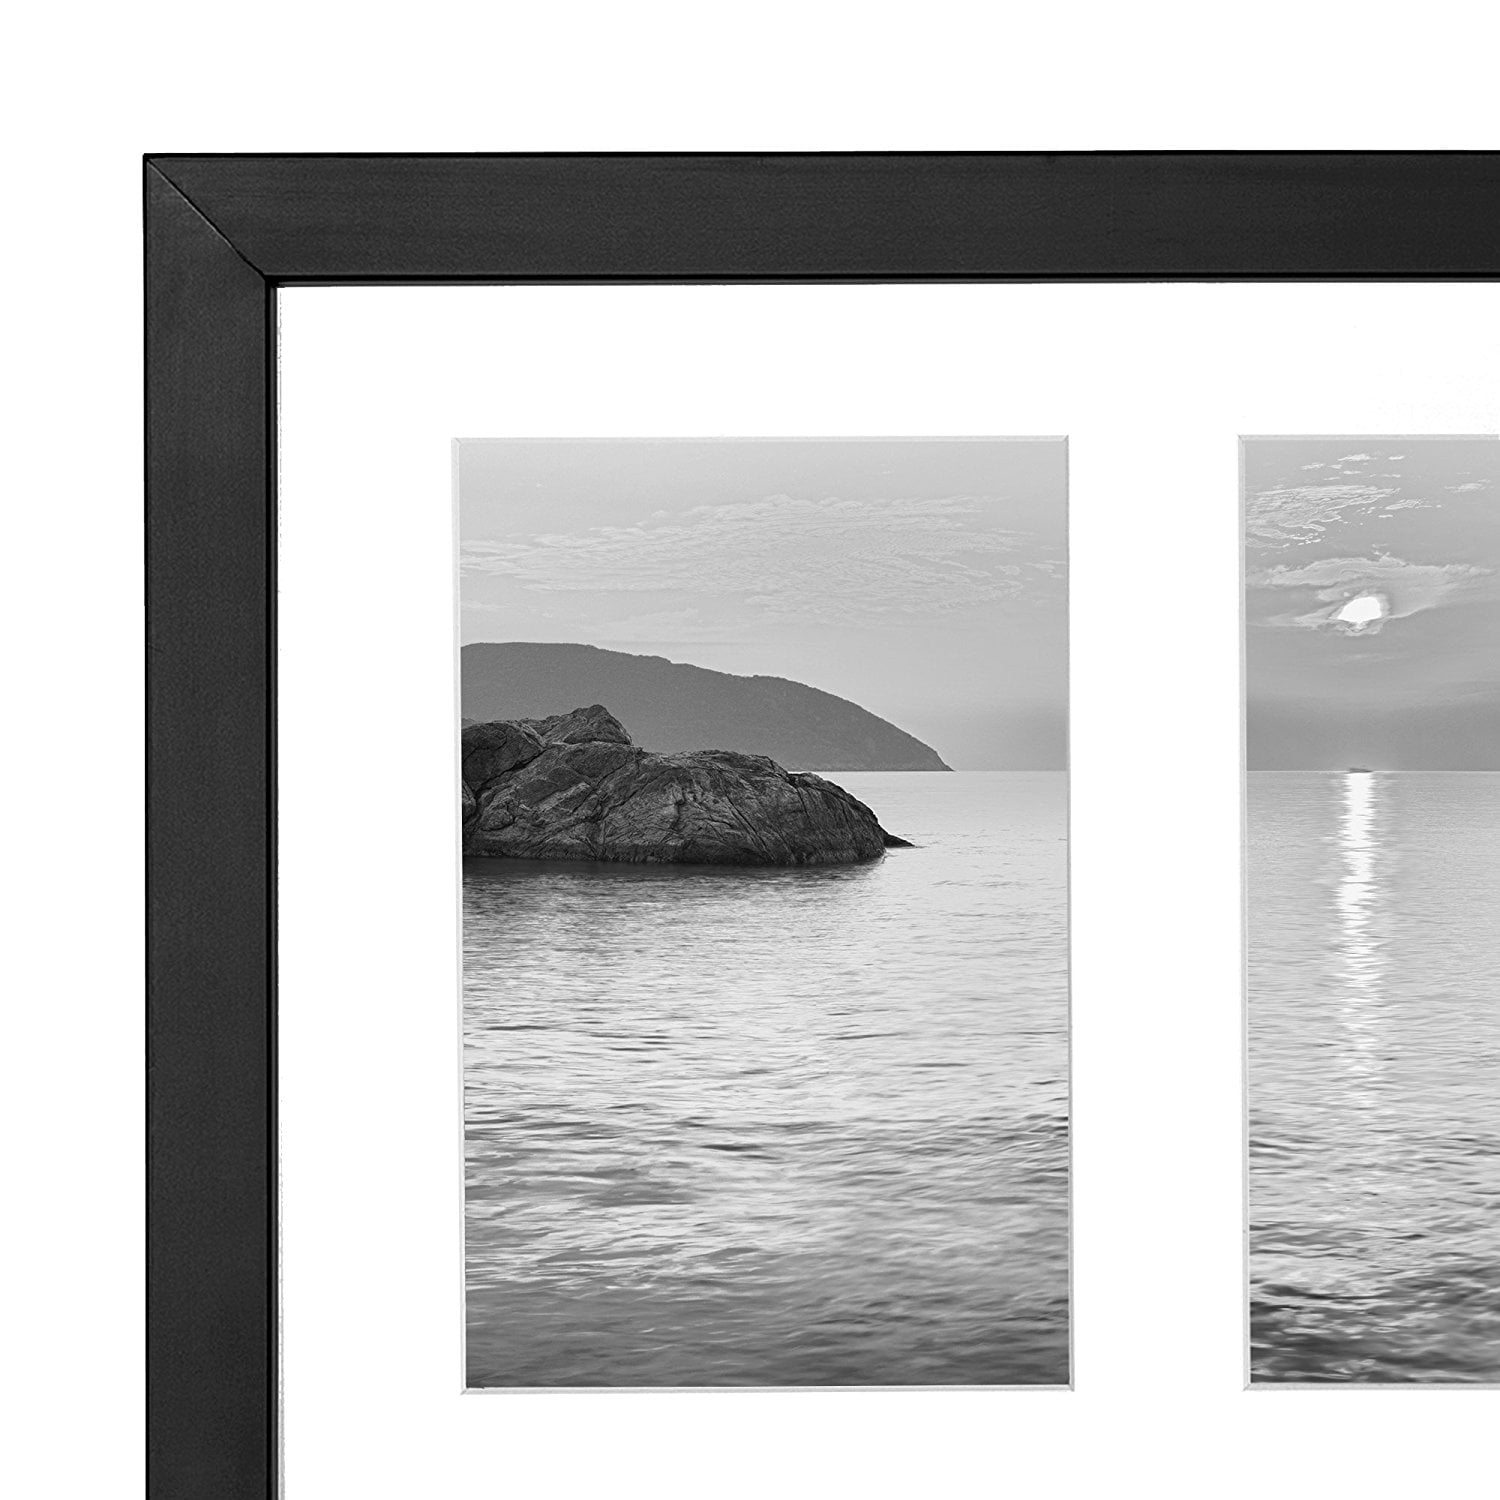 Americanflat 10x20 Collage Picture Frame with Three 5x7 Displays in Black - Comp